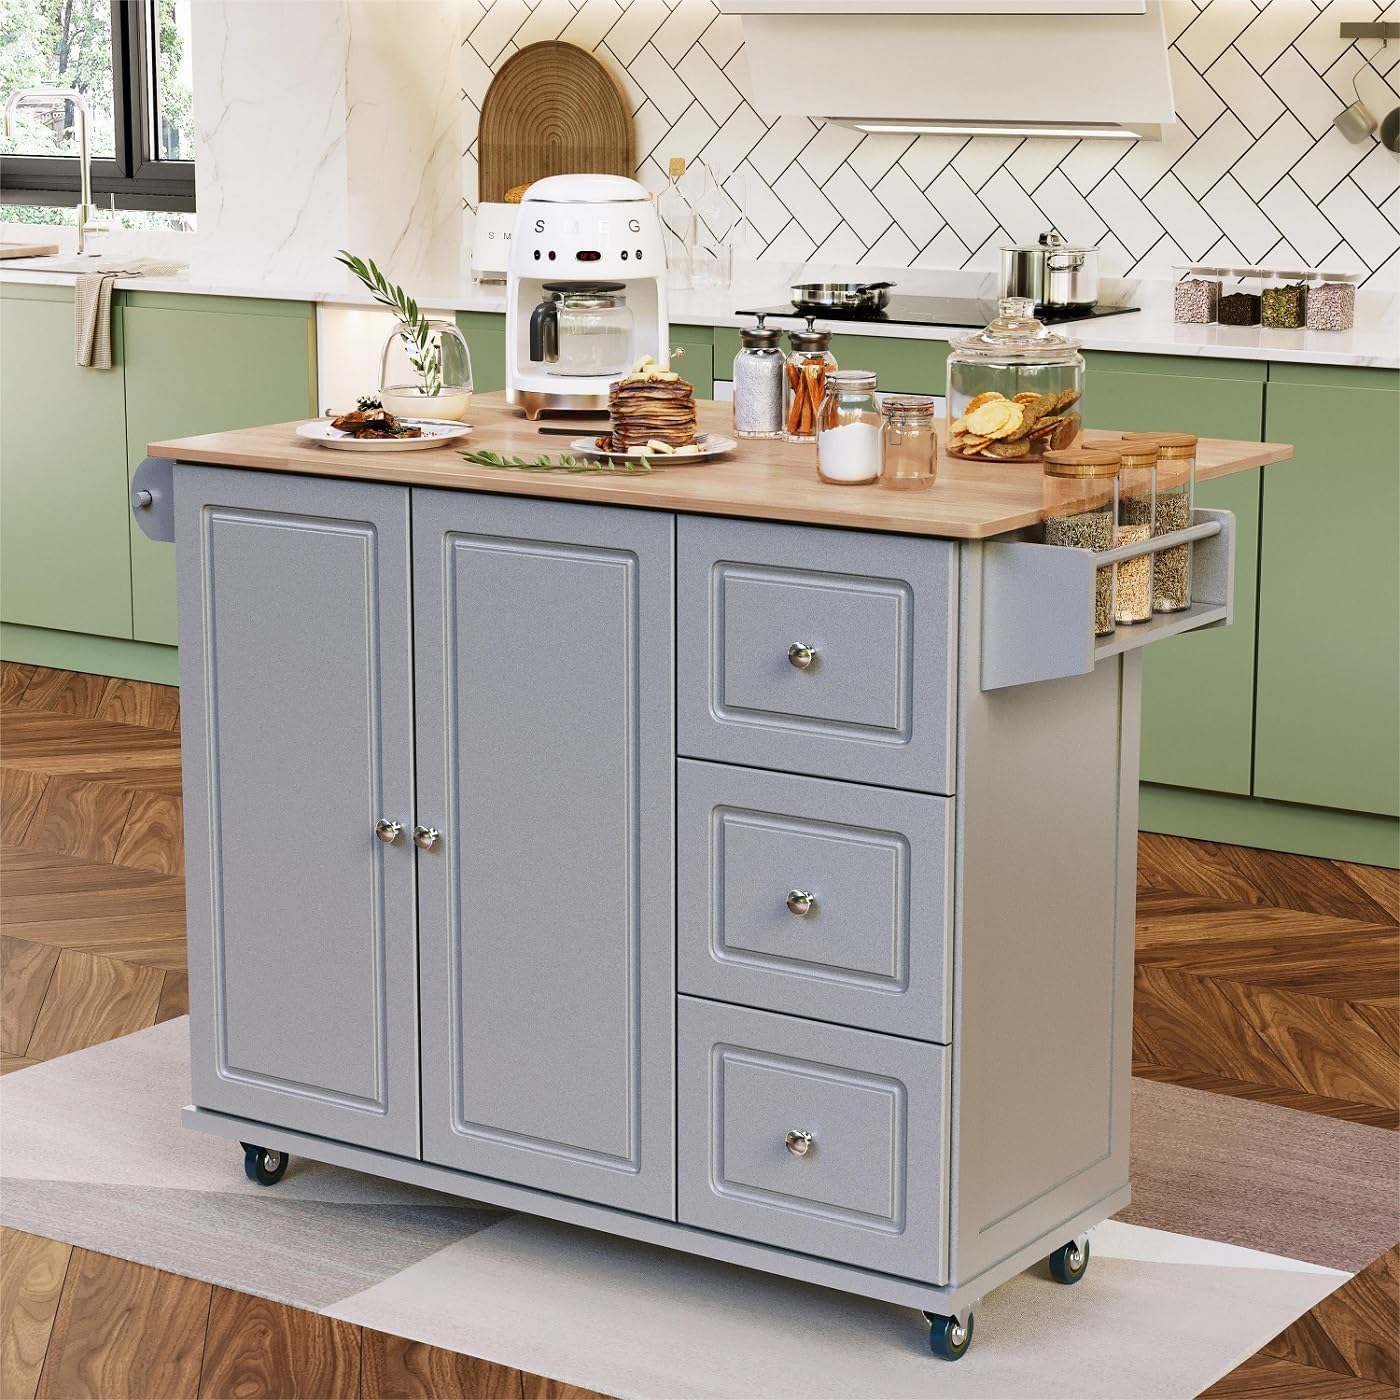 MFSTUDIO Rolling Kitchen Island on Wheels with Drop-Leaf, Mobile Kitchen Island Cart with 3 Drawers Storage Cabinet, Wood Countertop, Adjustable Shelf, Towel Bar and Spice Rack for Dining Room, Grey